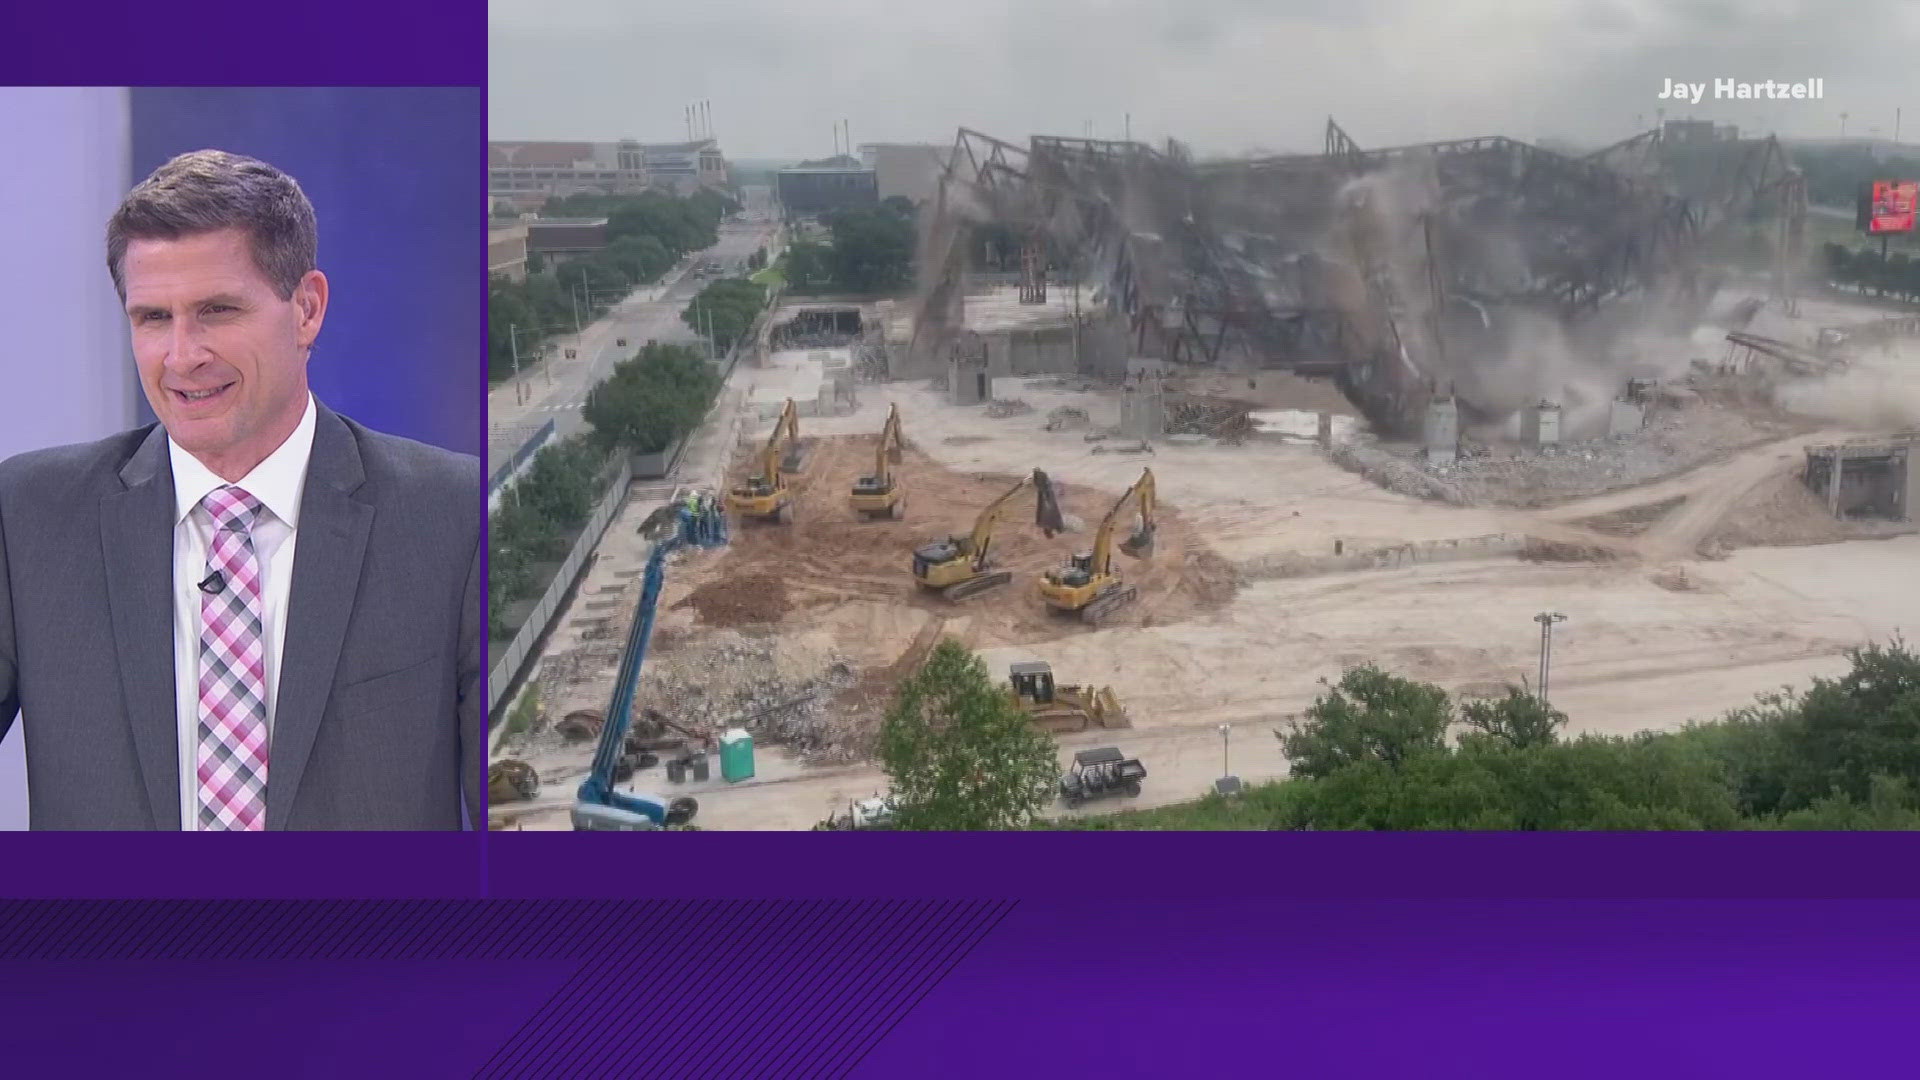 The arena that housed both Texas Longhorns basketball teams for almost 50 years was entirely demolished on Sunday, May 19.